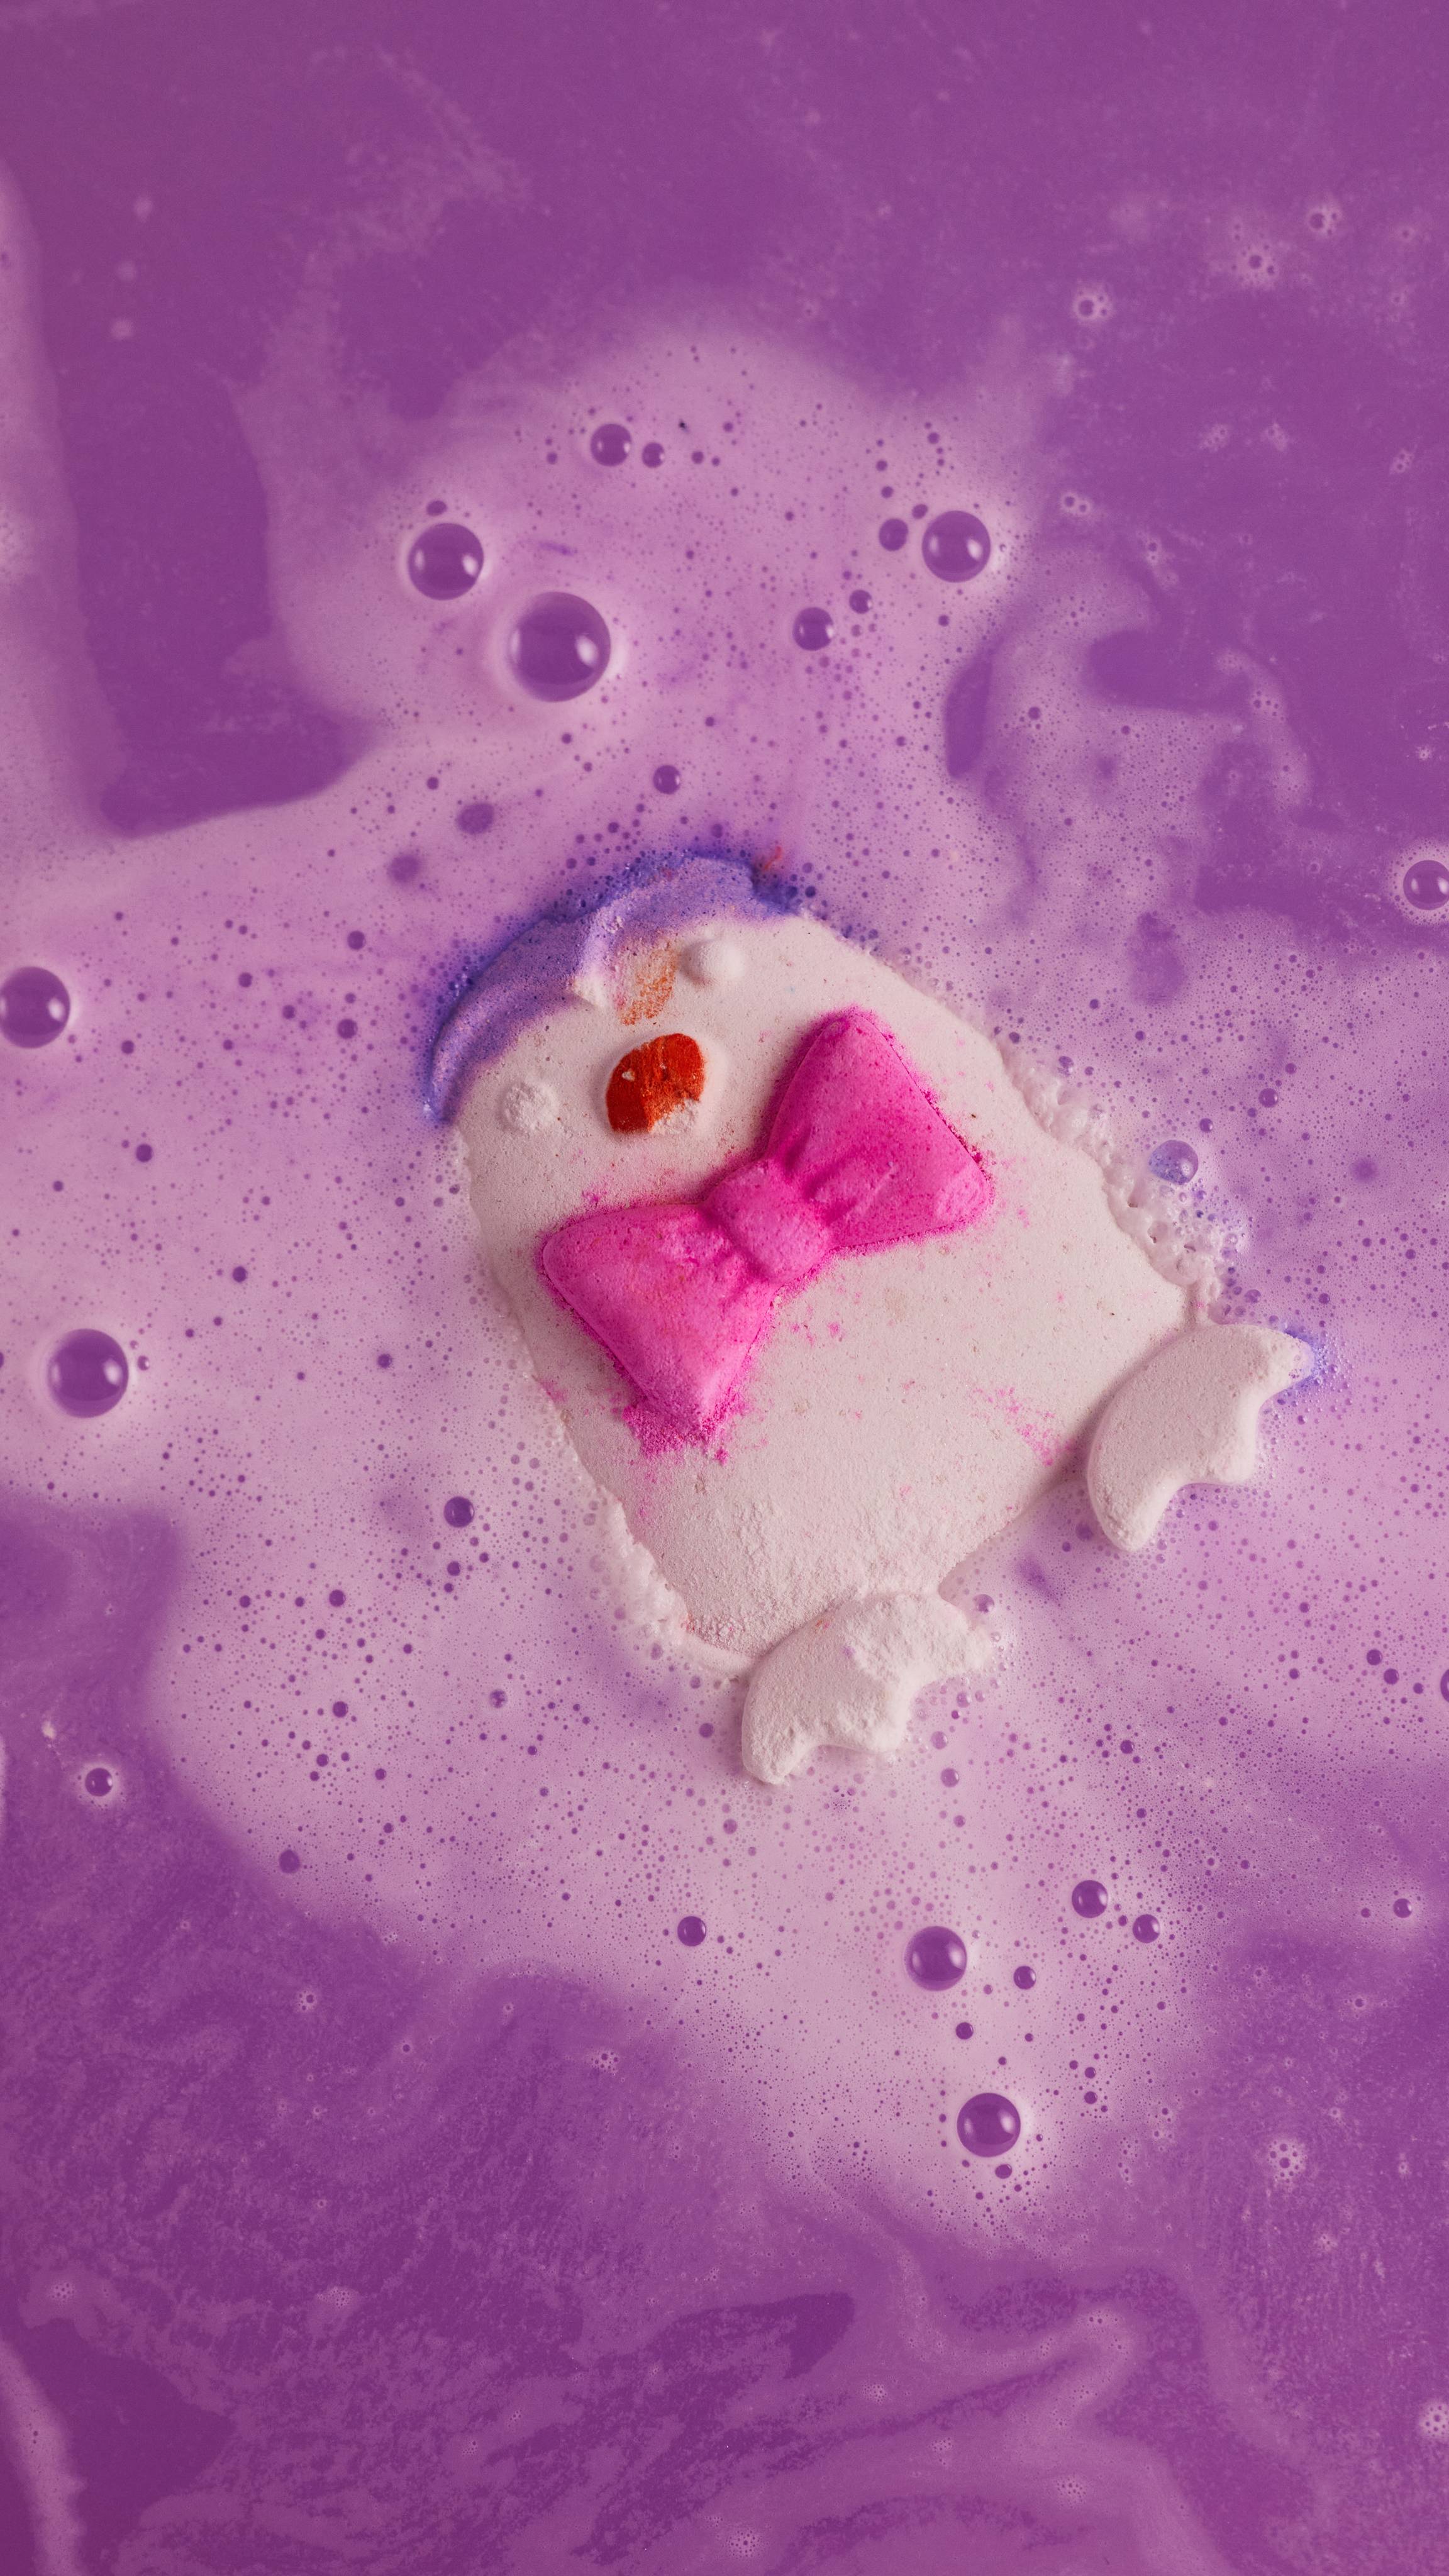 Penguin bath bomb begins to fizz away in the bath water giving off twirls of lavender coloured foam.